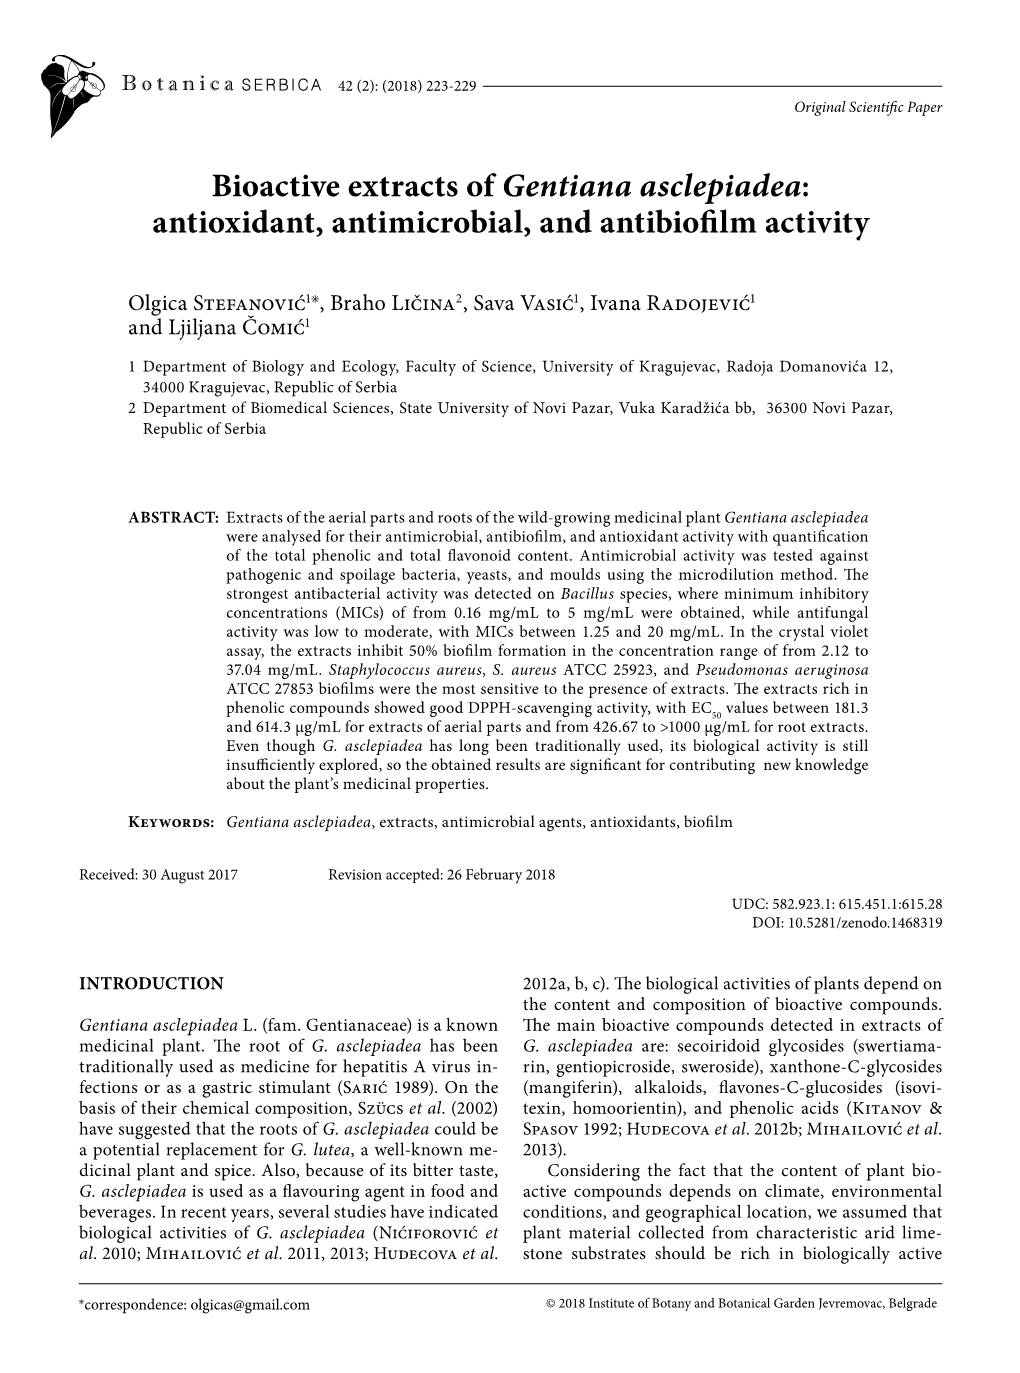 Bioactive Extracts of Gentiana Asclepiadea: Antioxidant, Antimicrobial, and Antibiofilm Activity